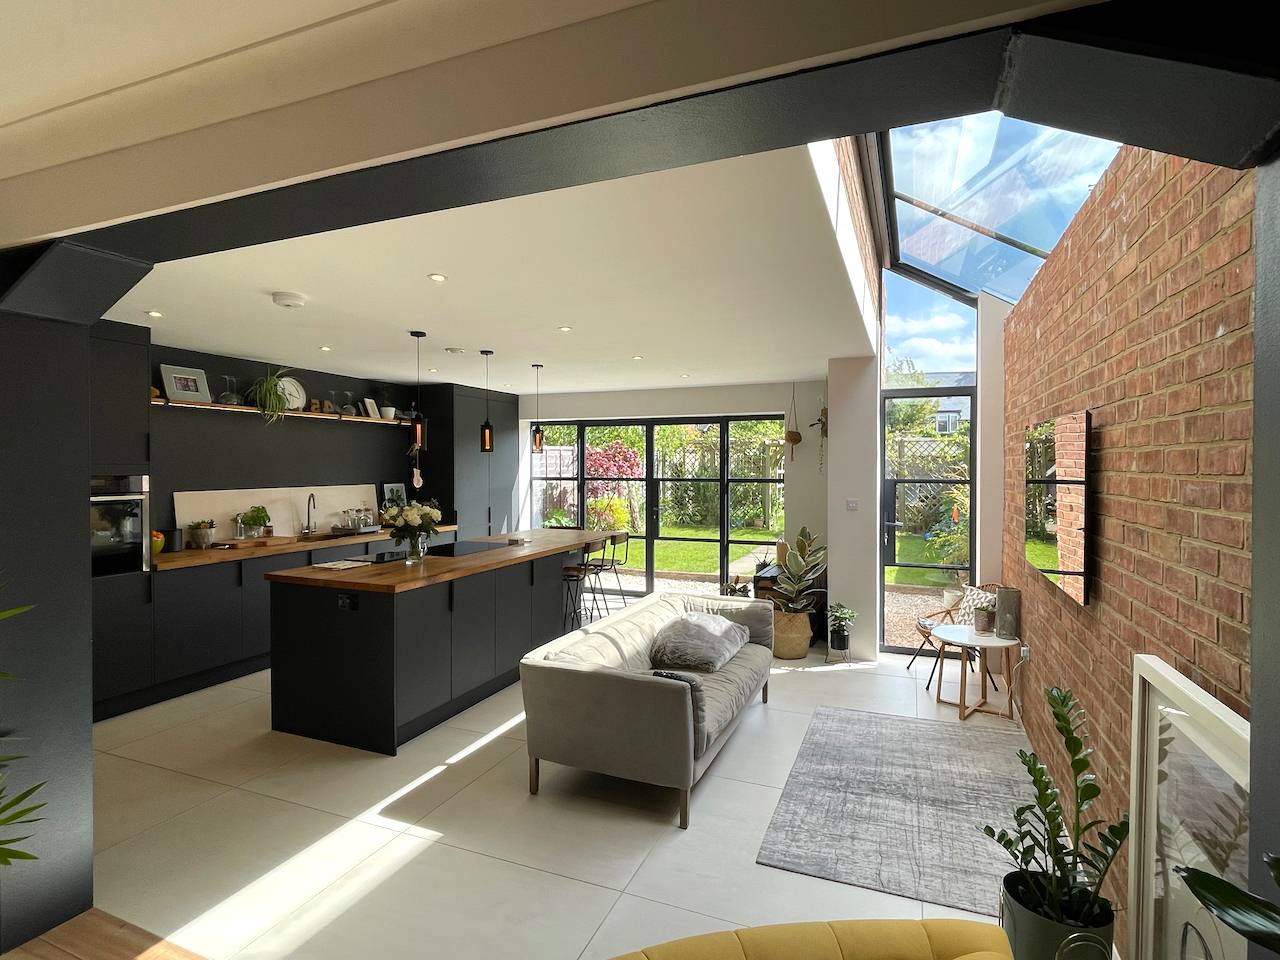 This wow factor, open-plan extension has added light, space and value to the home.